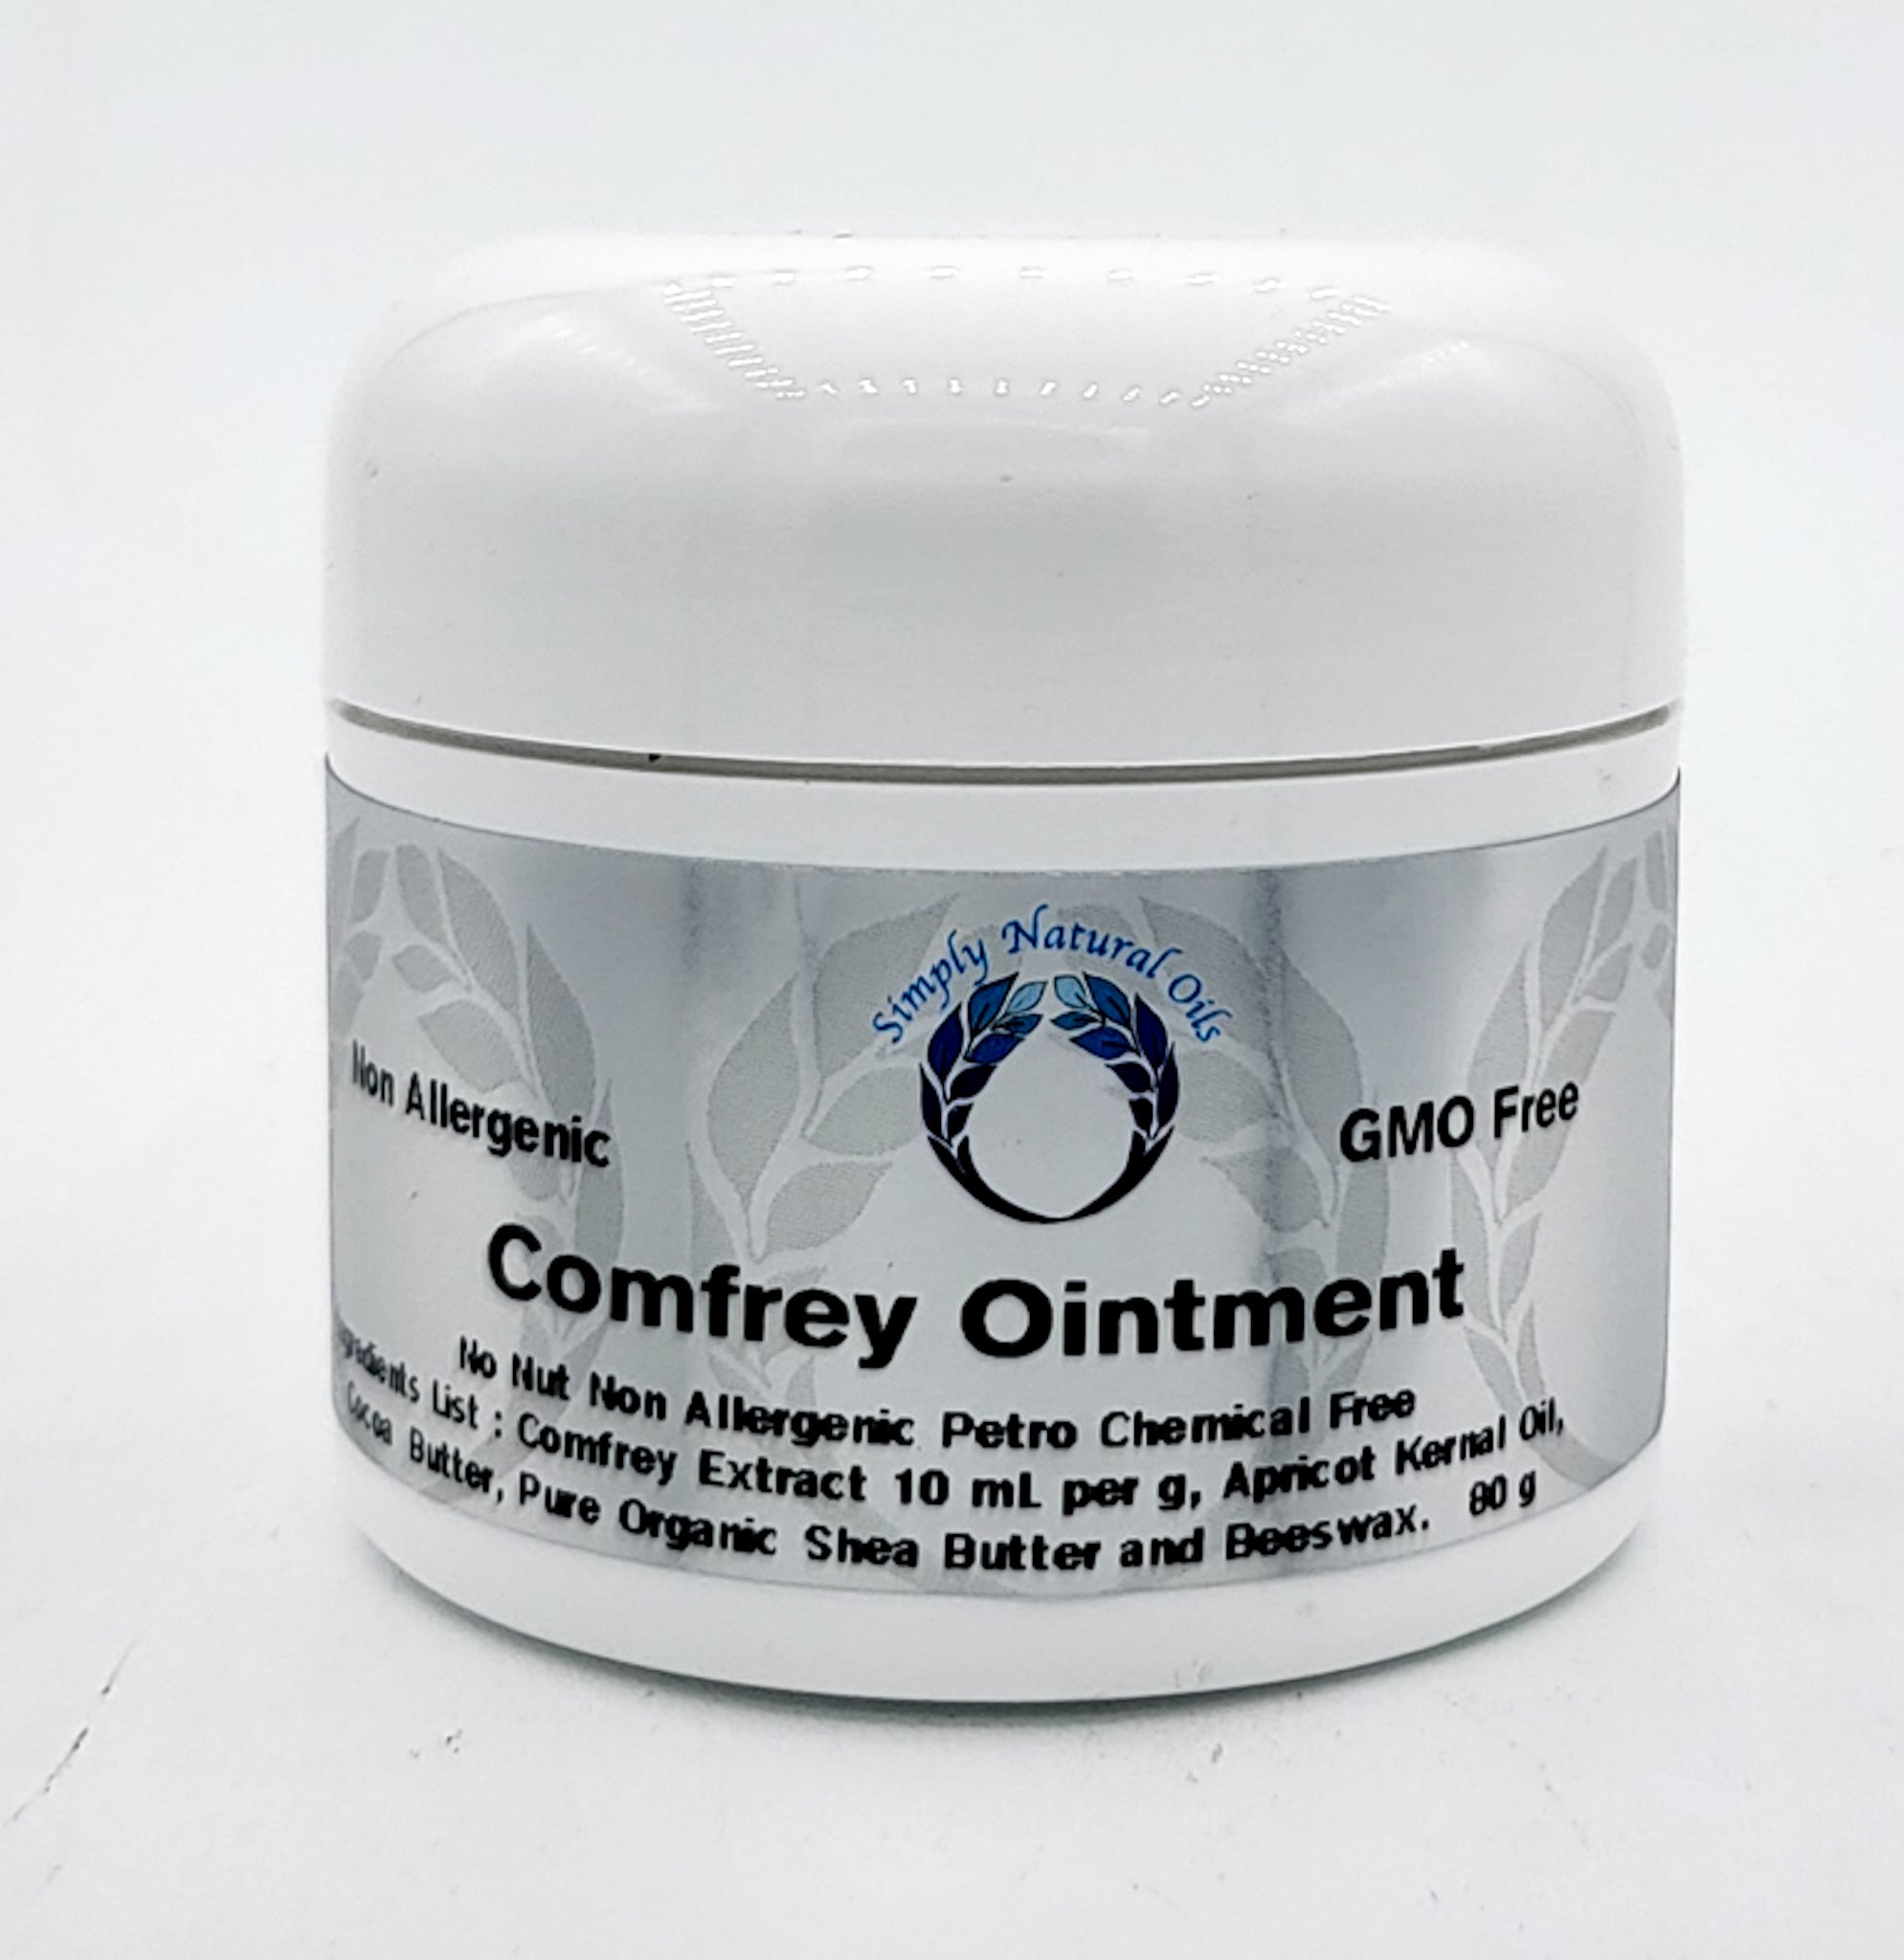 Simply Natural Oils Comfrey Ointment 80g